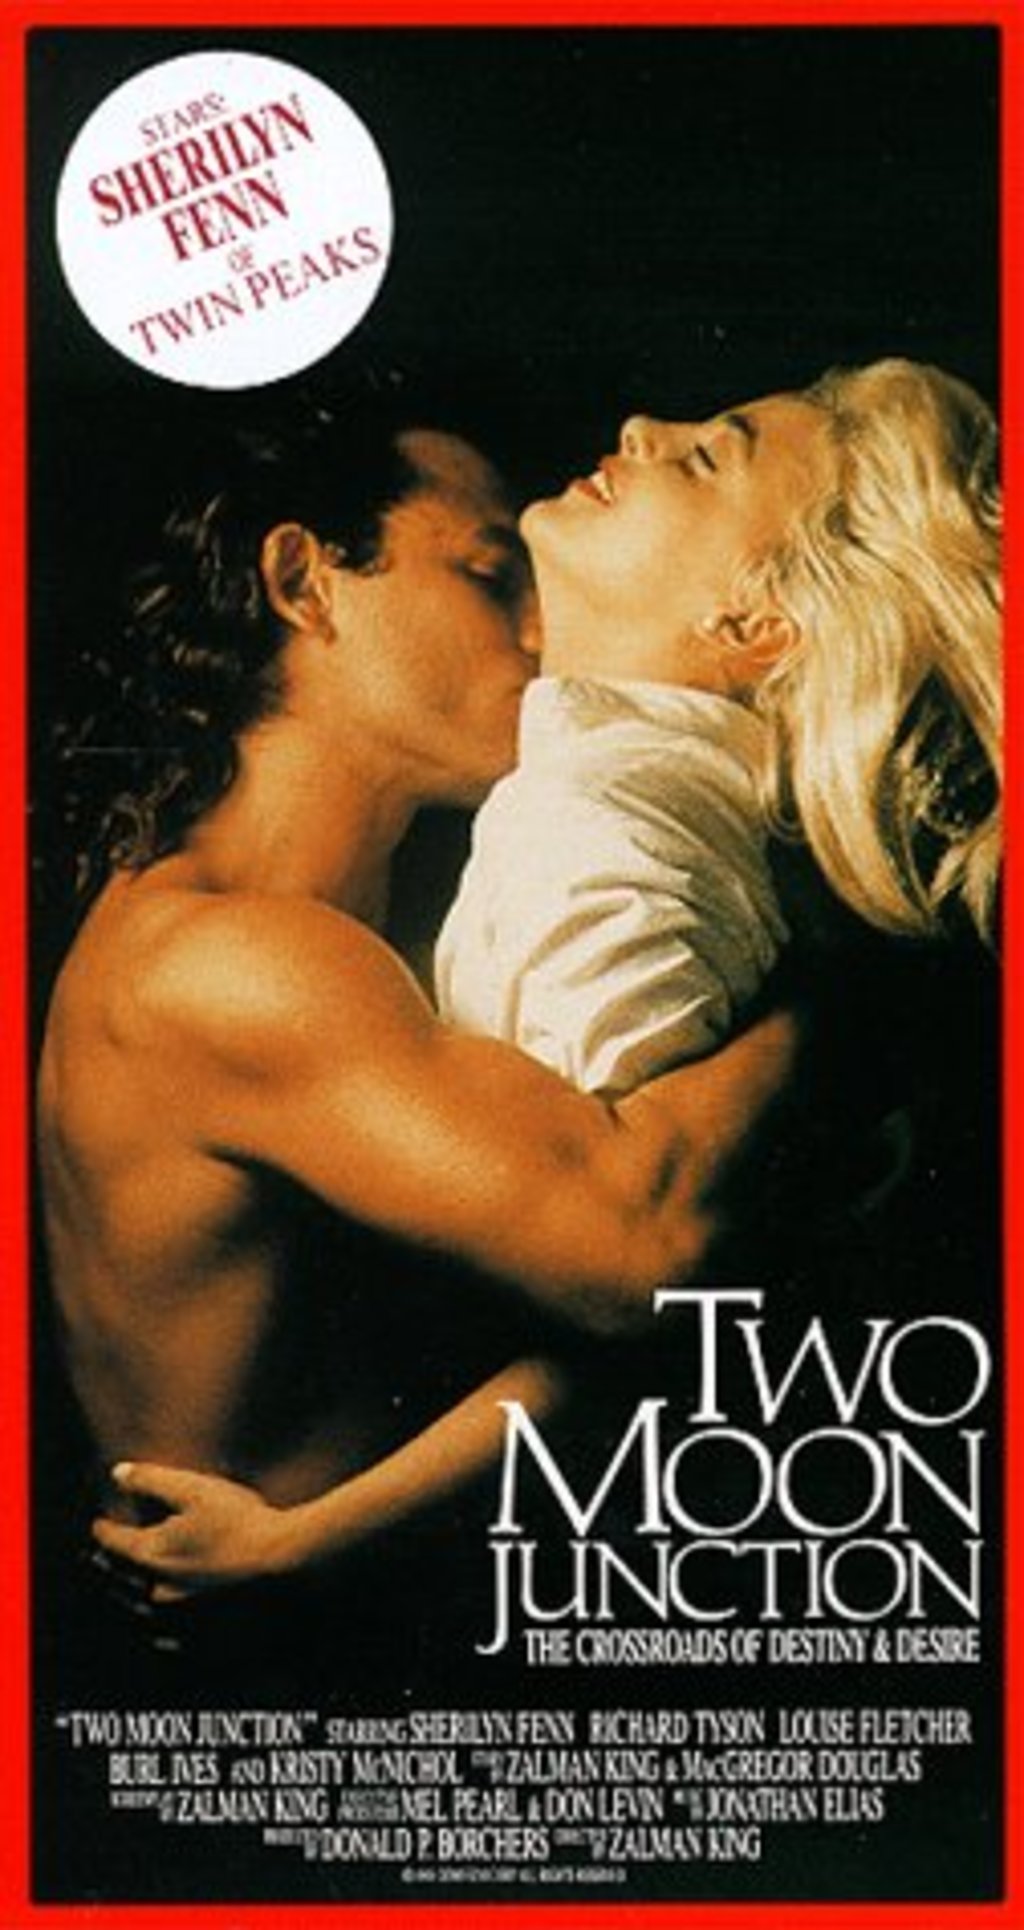 Watch Two Moon Junction On Netflix Today 